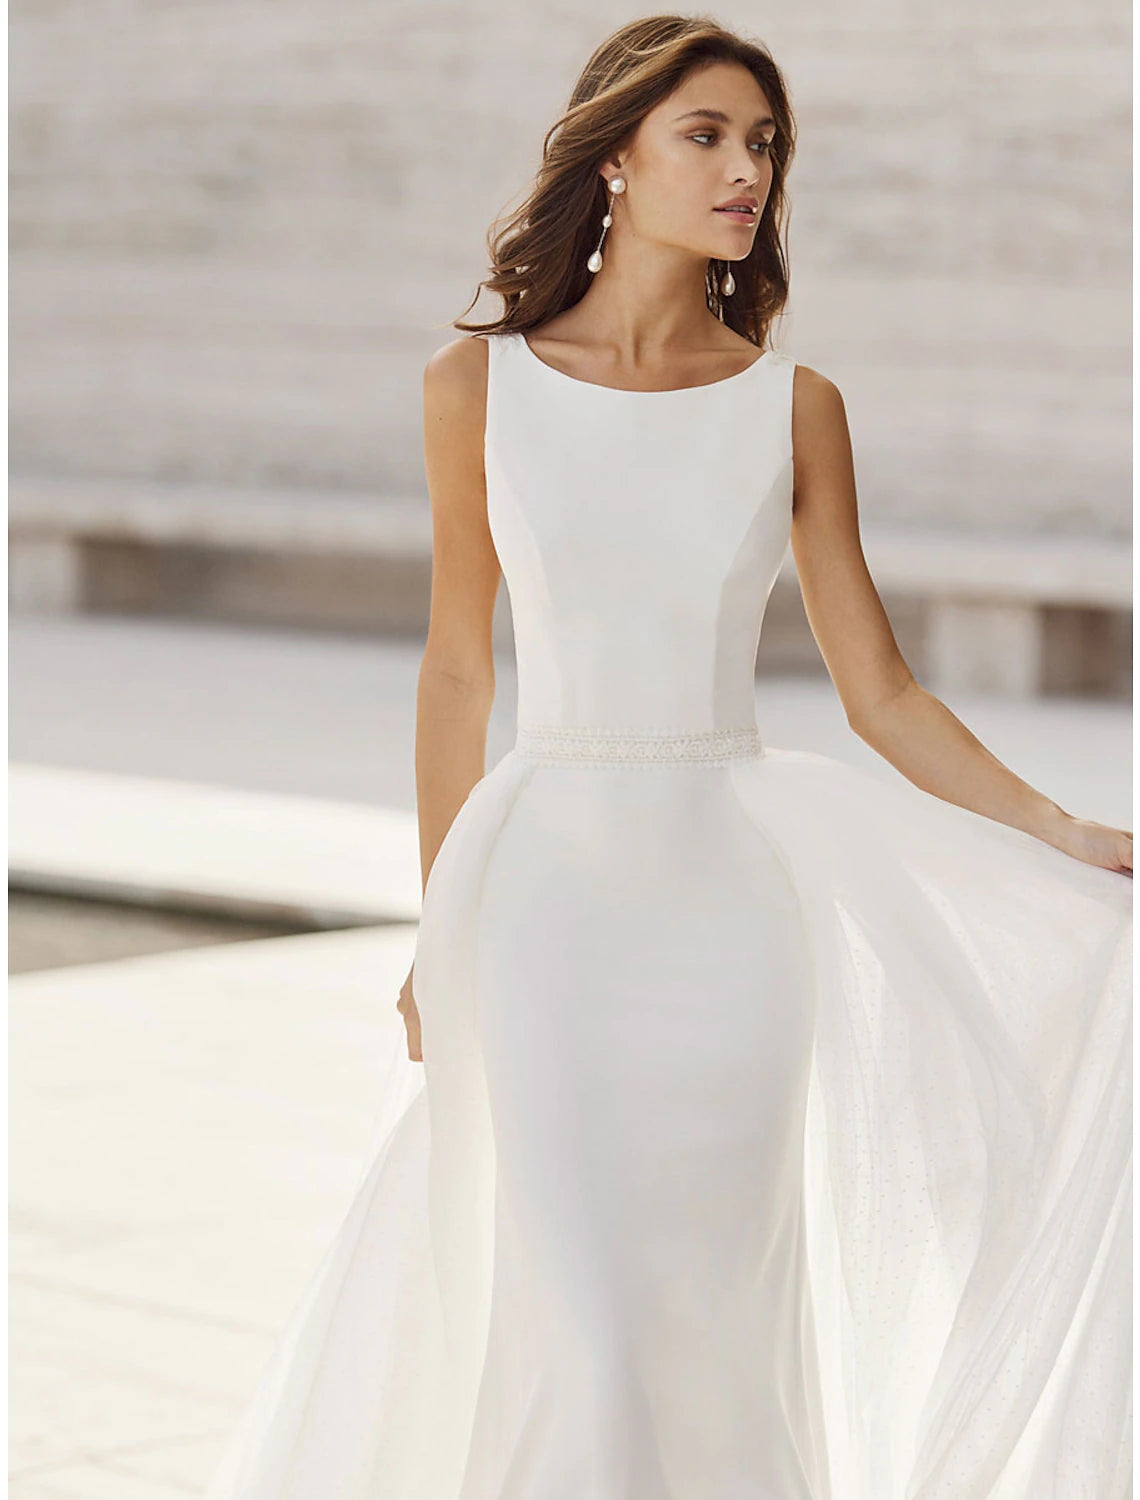 Beach Open Back Wedding Dresses Mermaid / Trumpet Scoop Neck Sleeveless Court Train Satin Bridal Suits Bridal Gowns With Appliques Summer Wedding Party